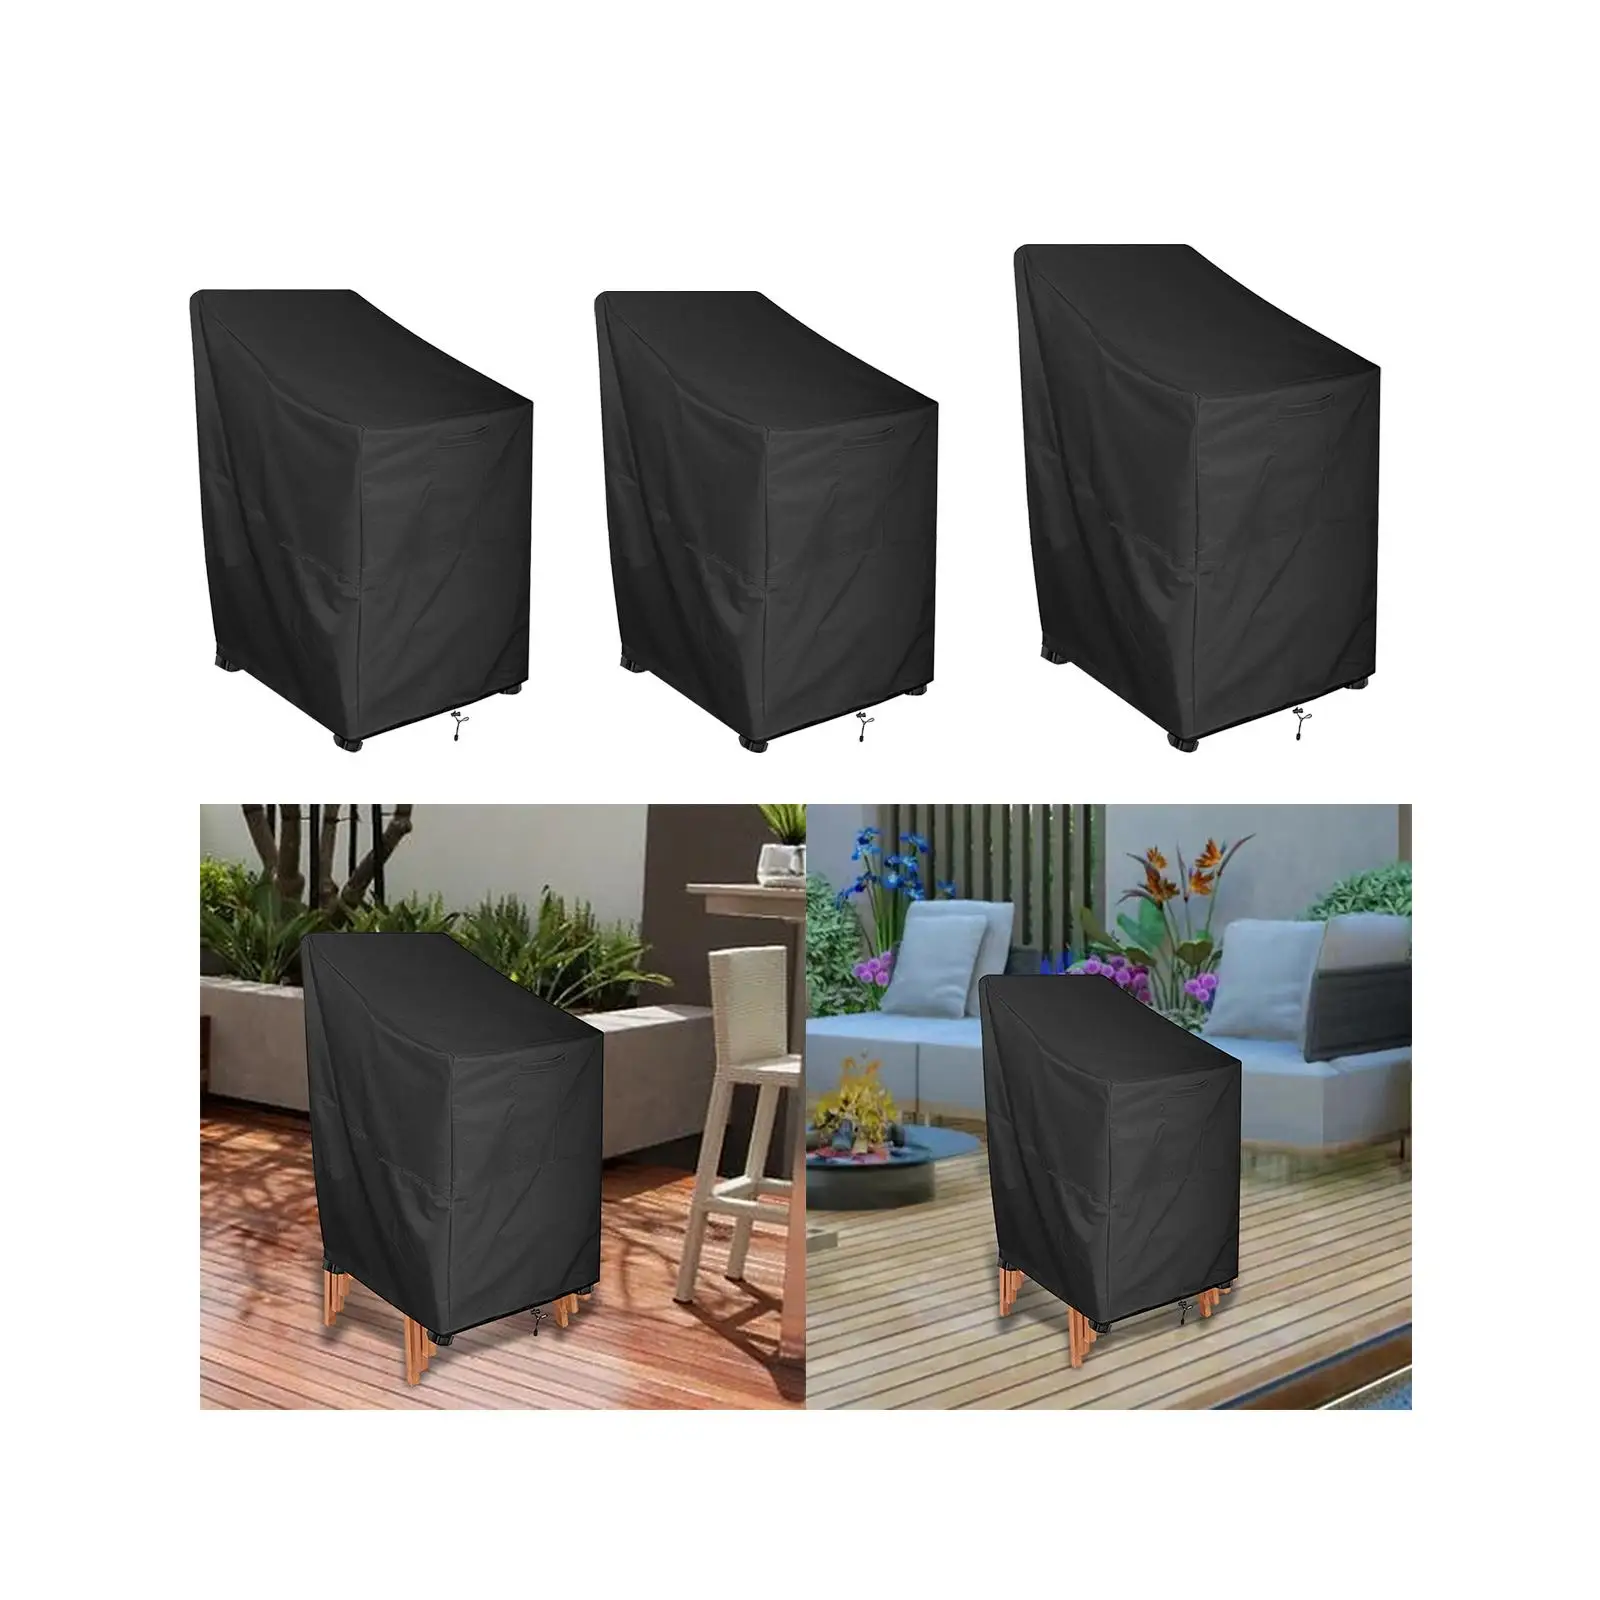 Garden Patio Chair Cover, Water Resistant Deep Seat Cover, Drawstring Stackable Chair Covers Outdoor Furniture Cover for Lawn